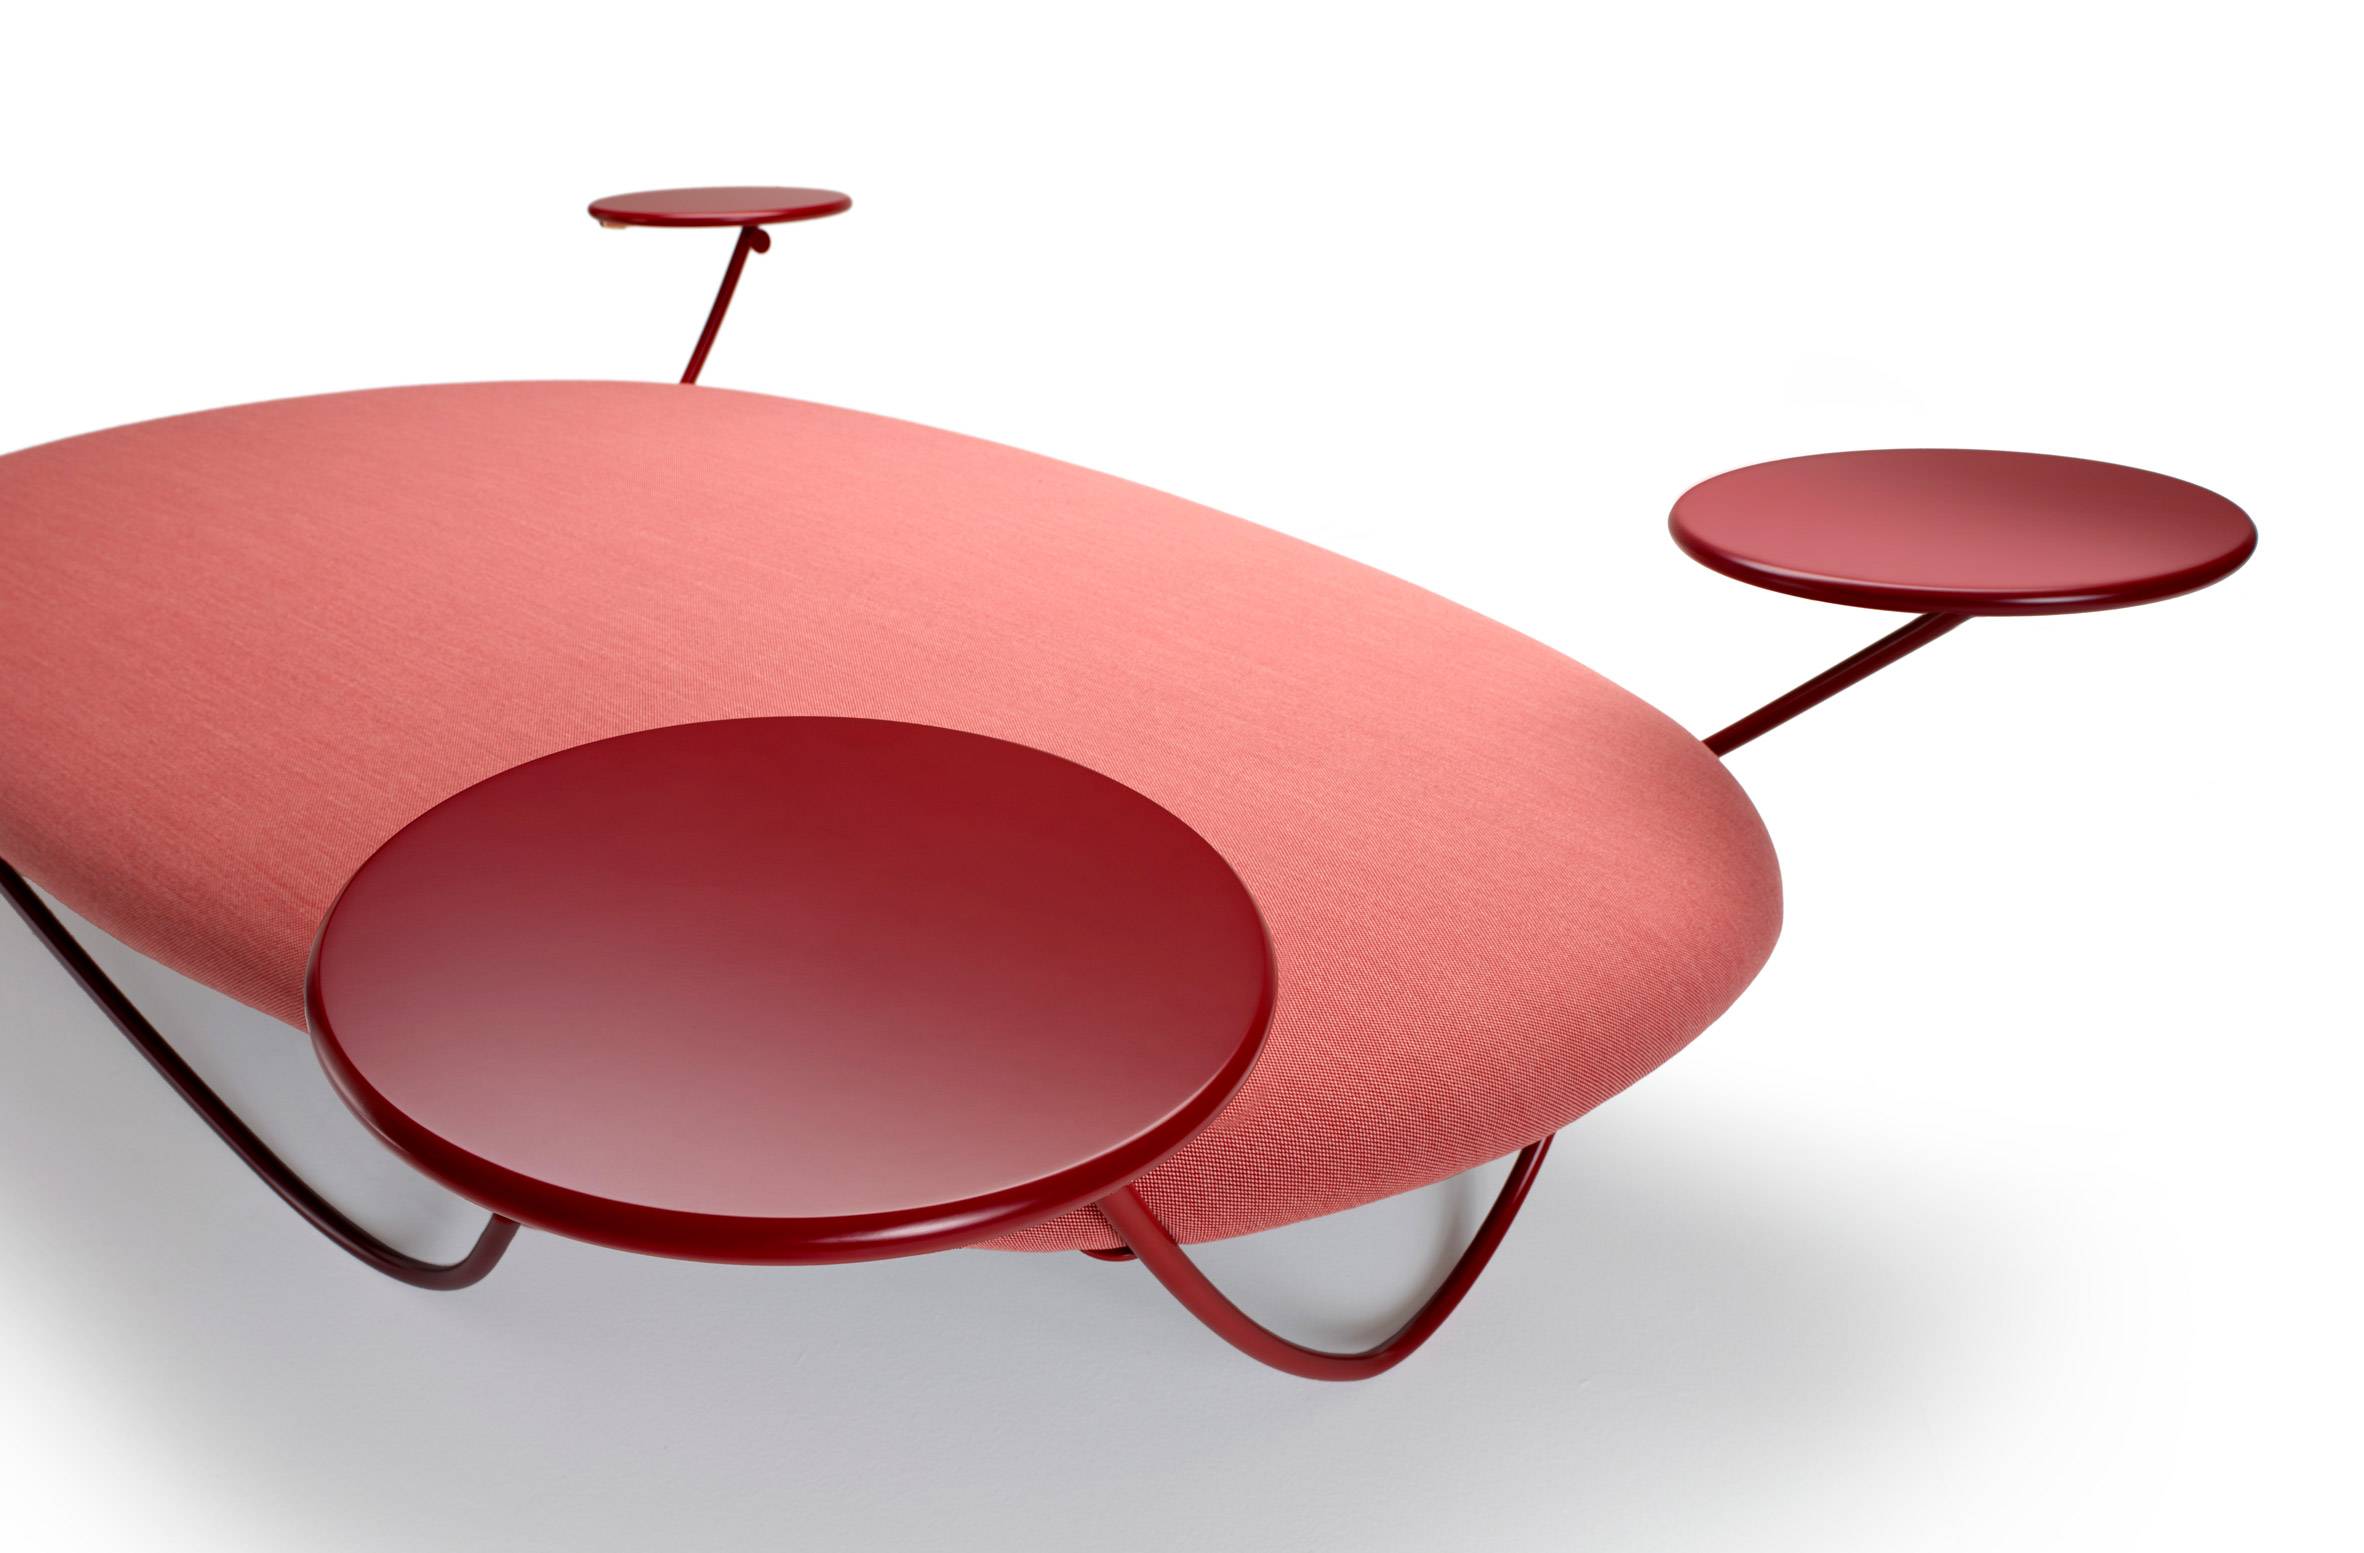 Dune for Offecct